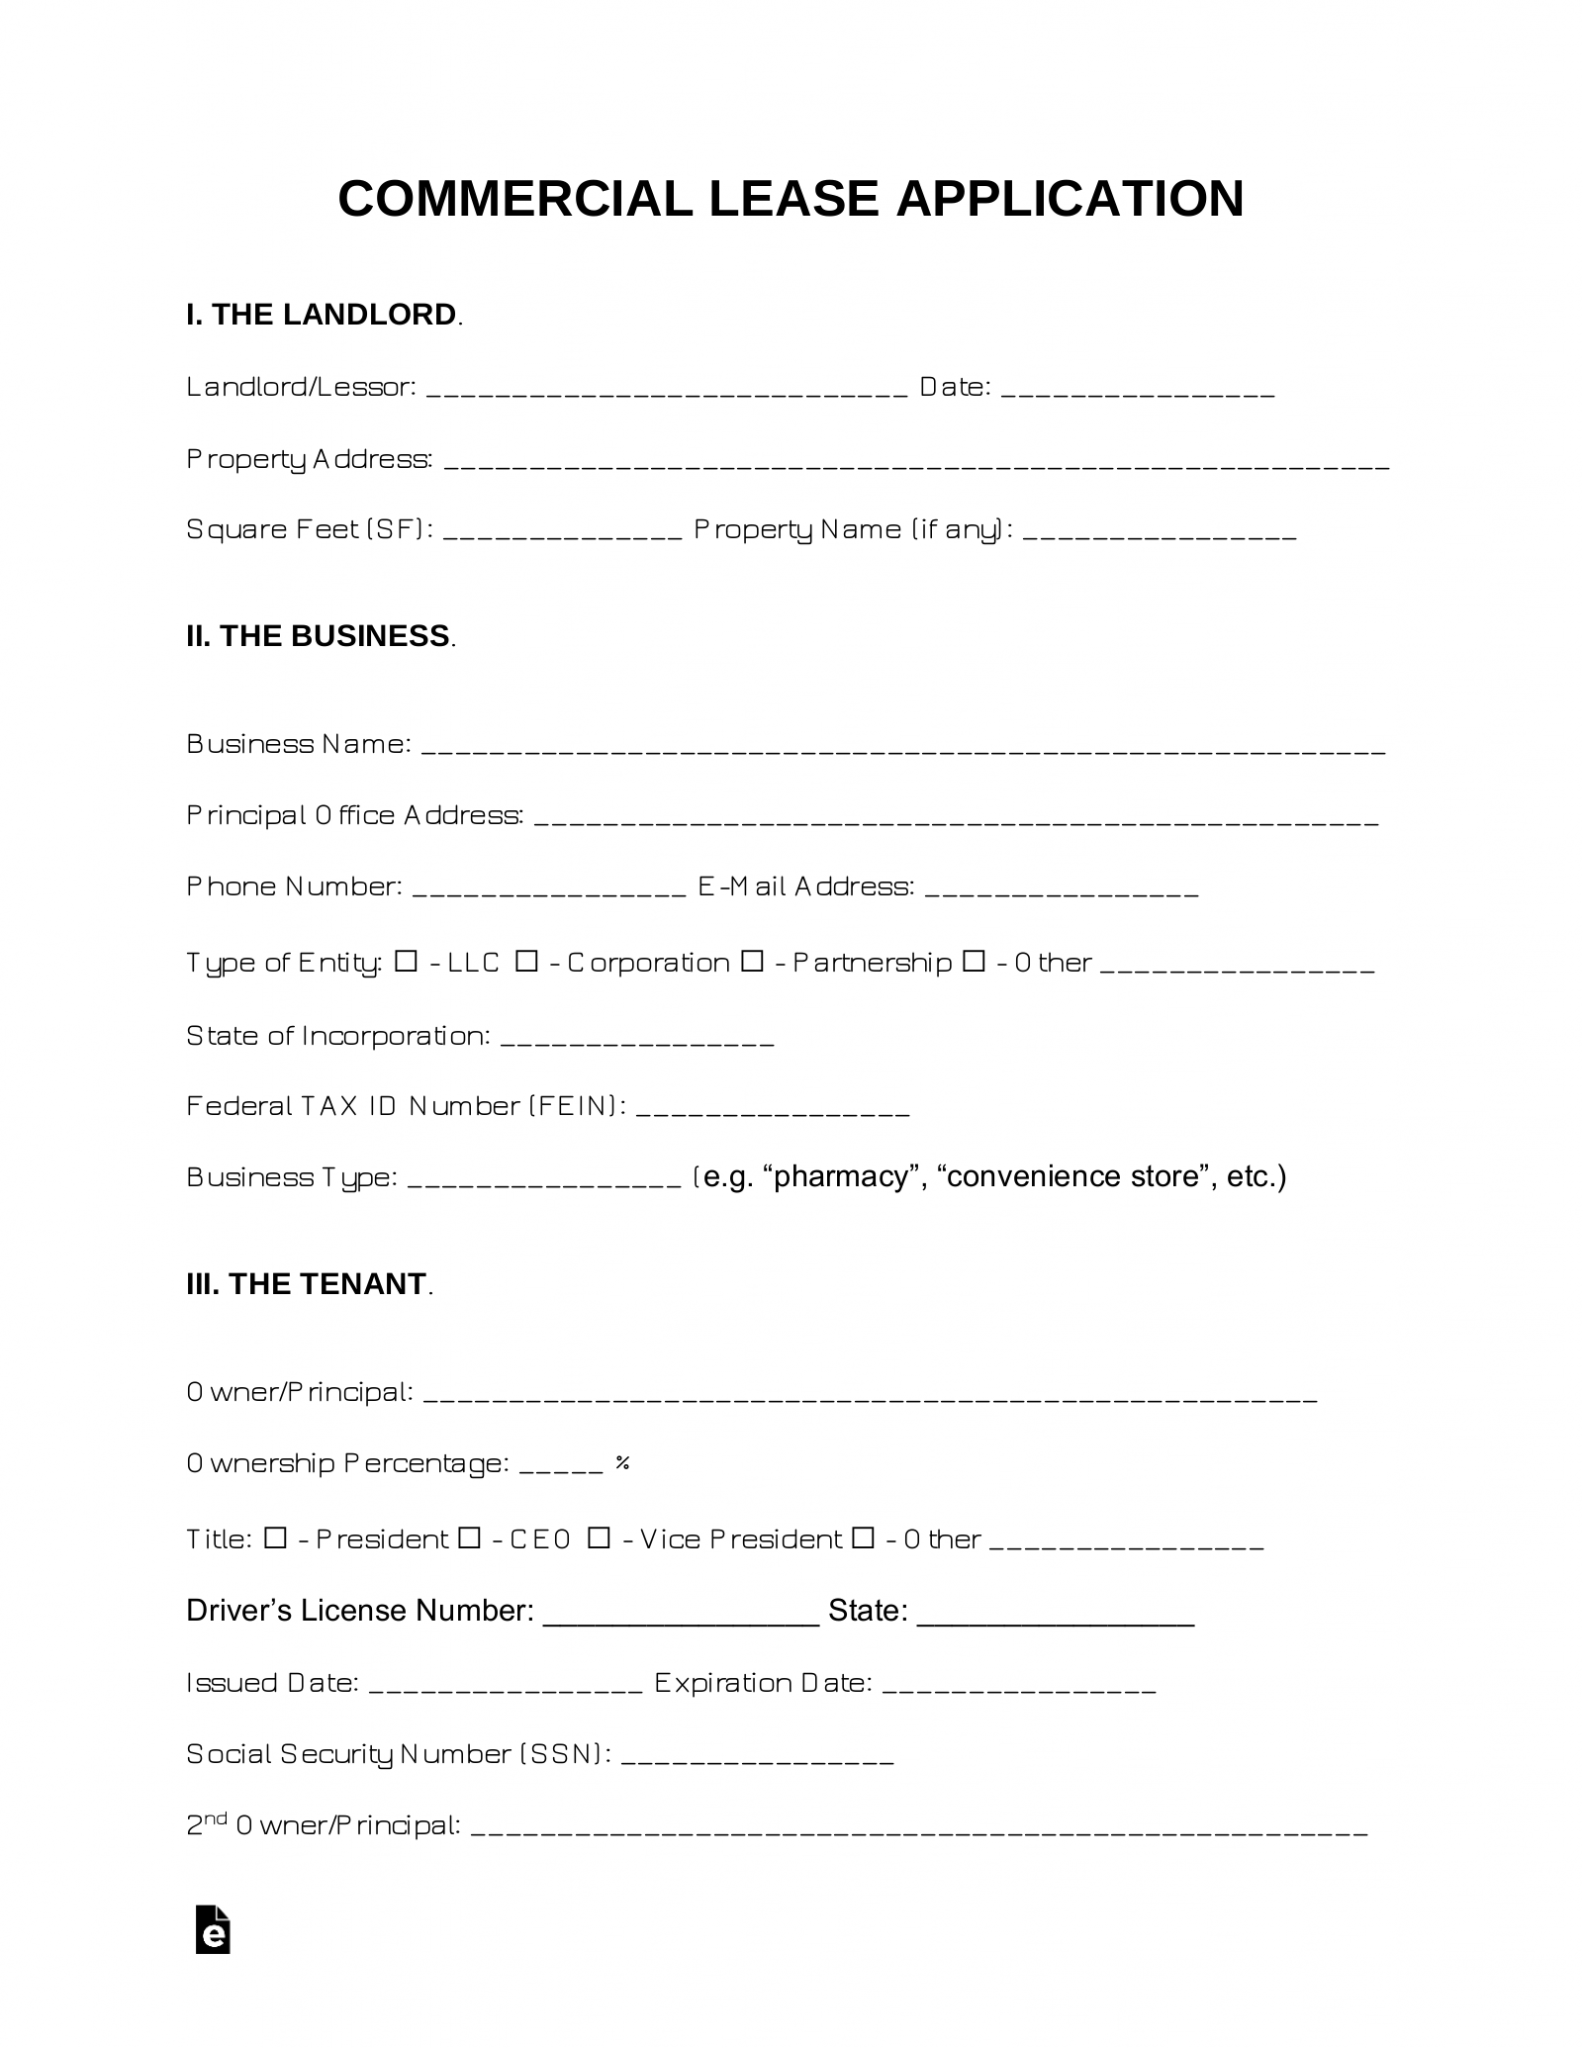 free-commercial-lease-application-form-word-pdf-eforms